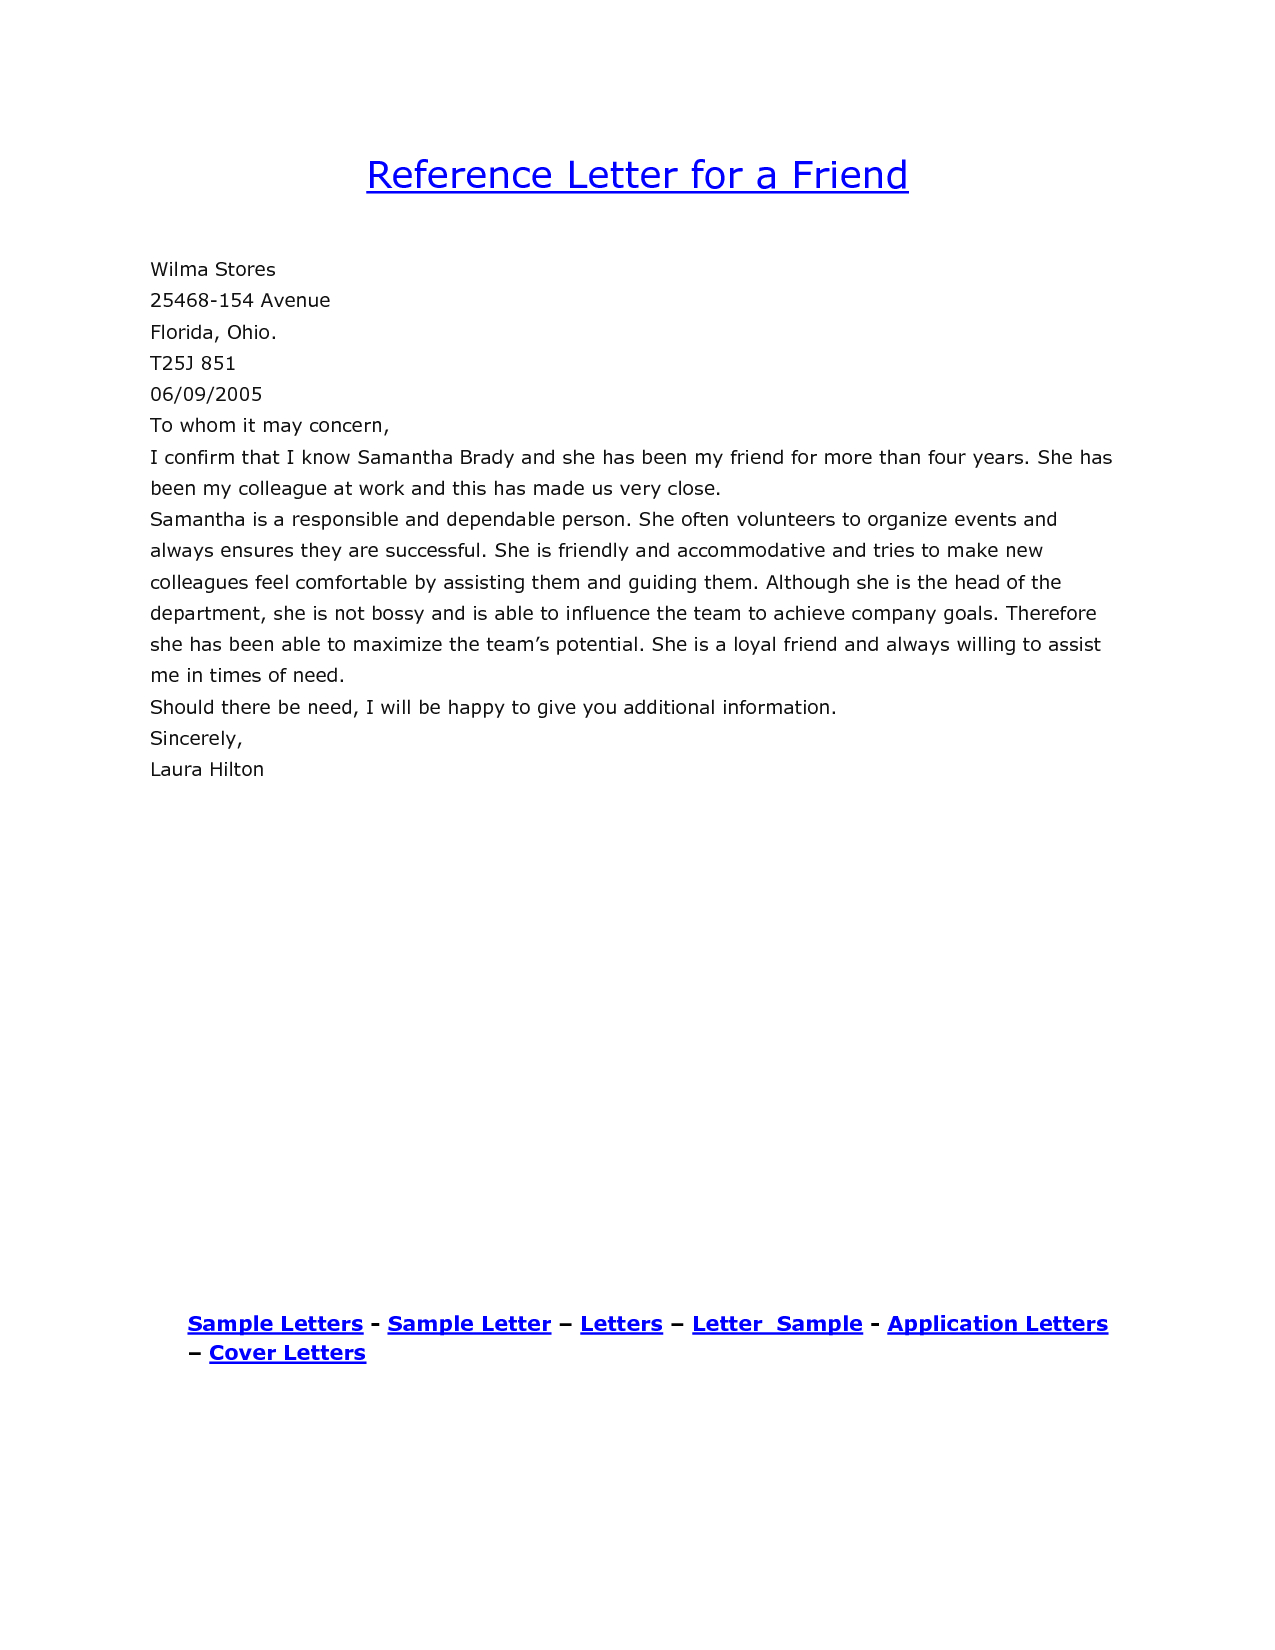 Reference Letter Sample For A Friend Yahoo Search Results inside sizing 1275 X 1650